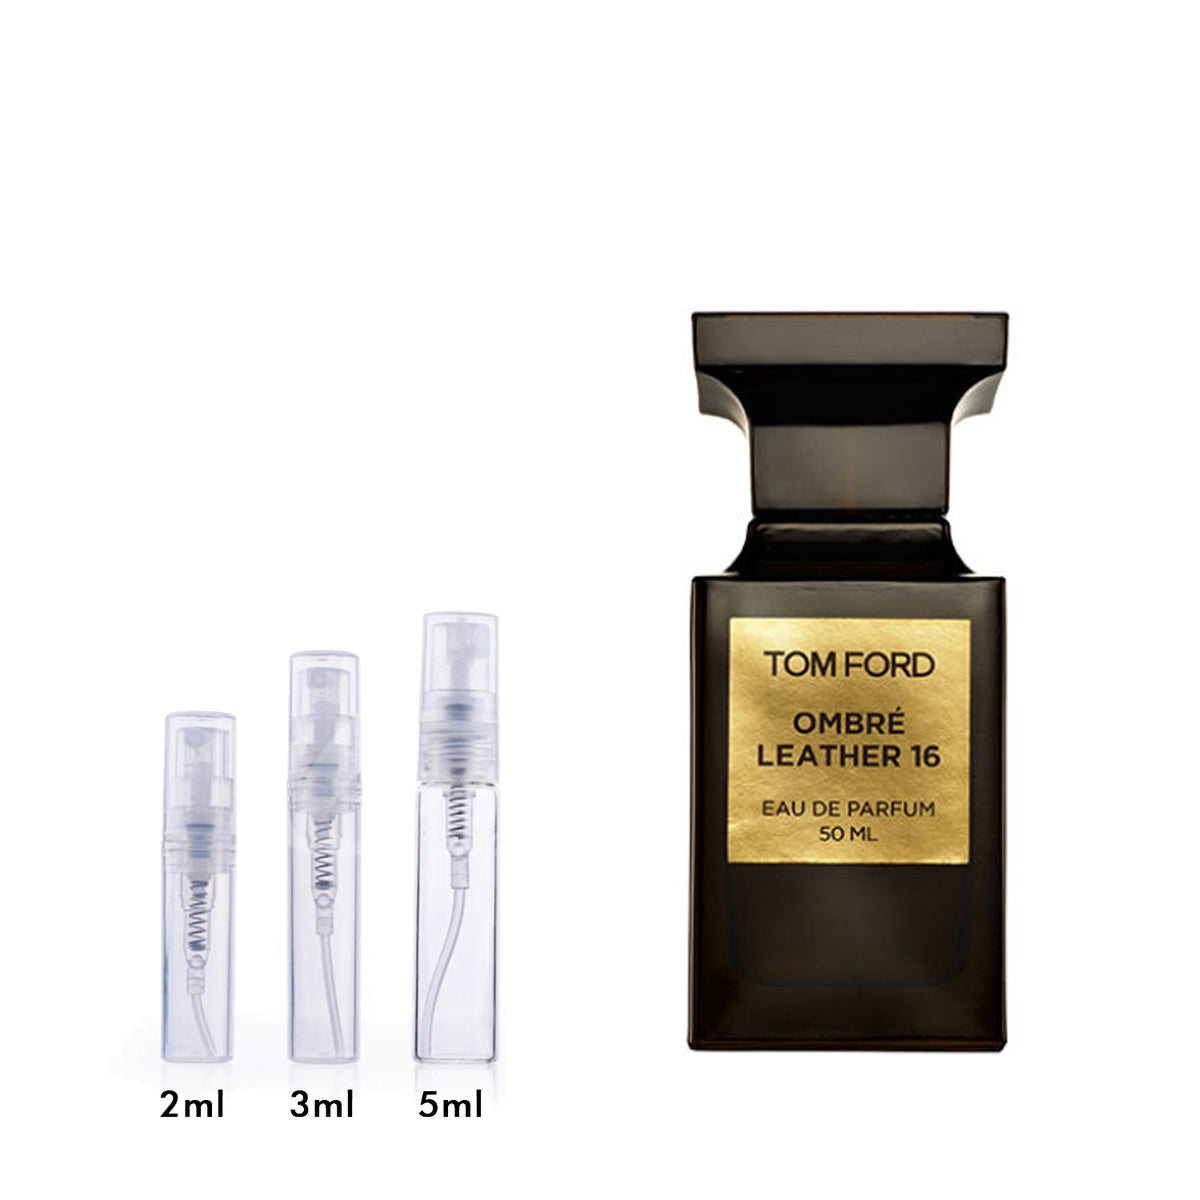 Tom Ford - Ombre Leather 16 - Oil Perfumery